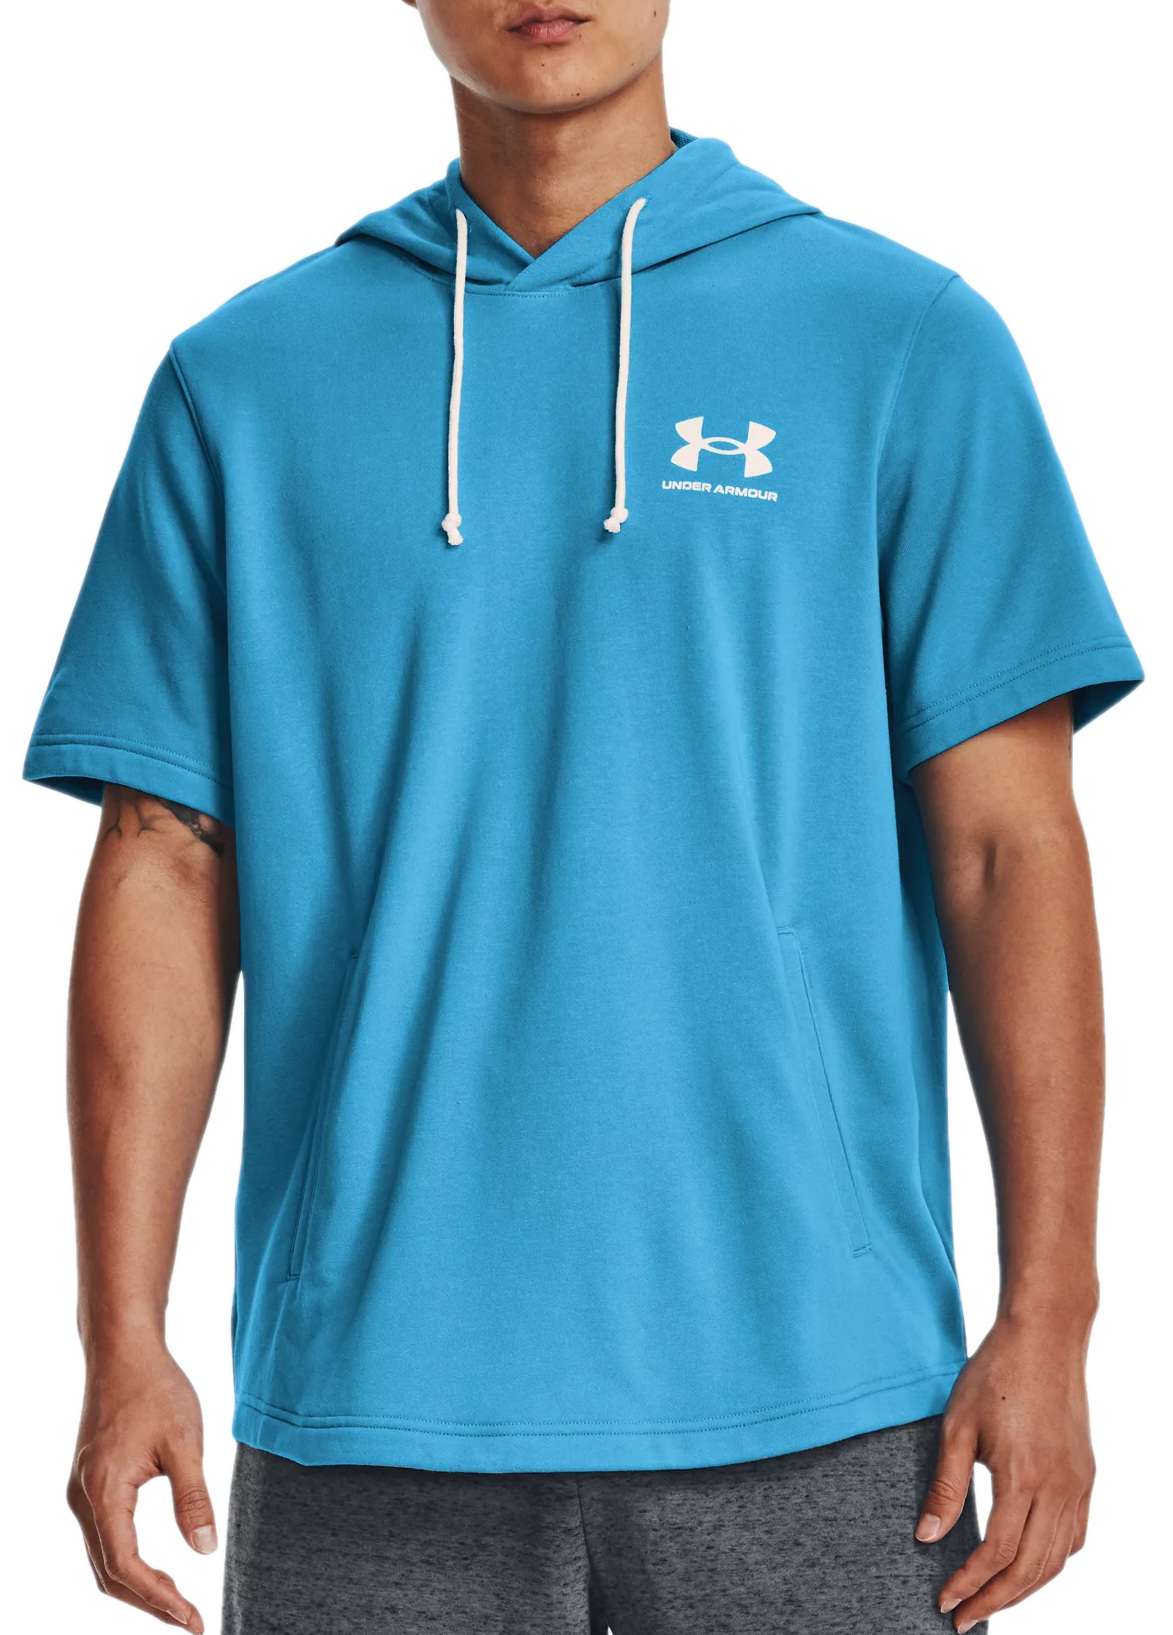 Hooded sweatshirt Under Armour Rival Terry